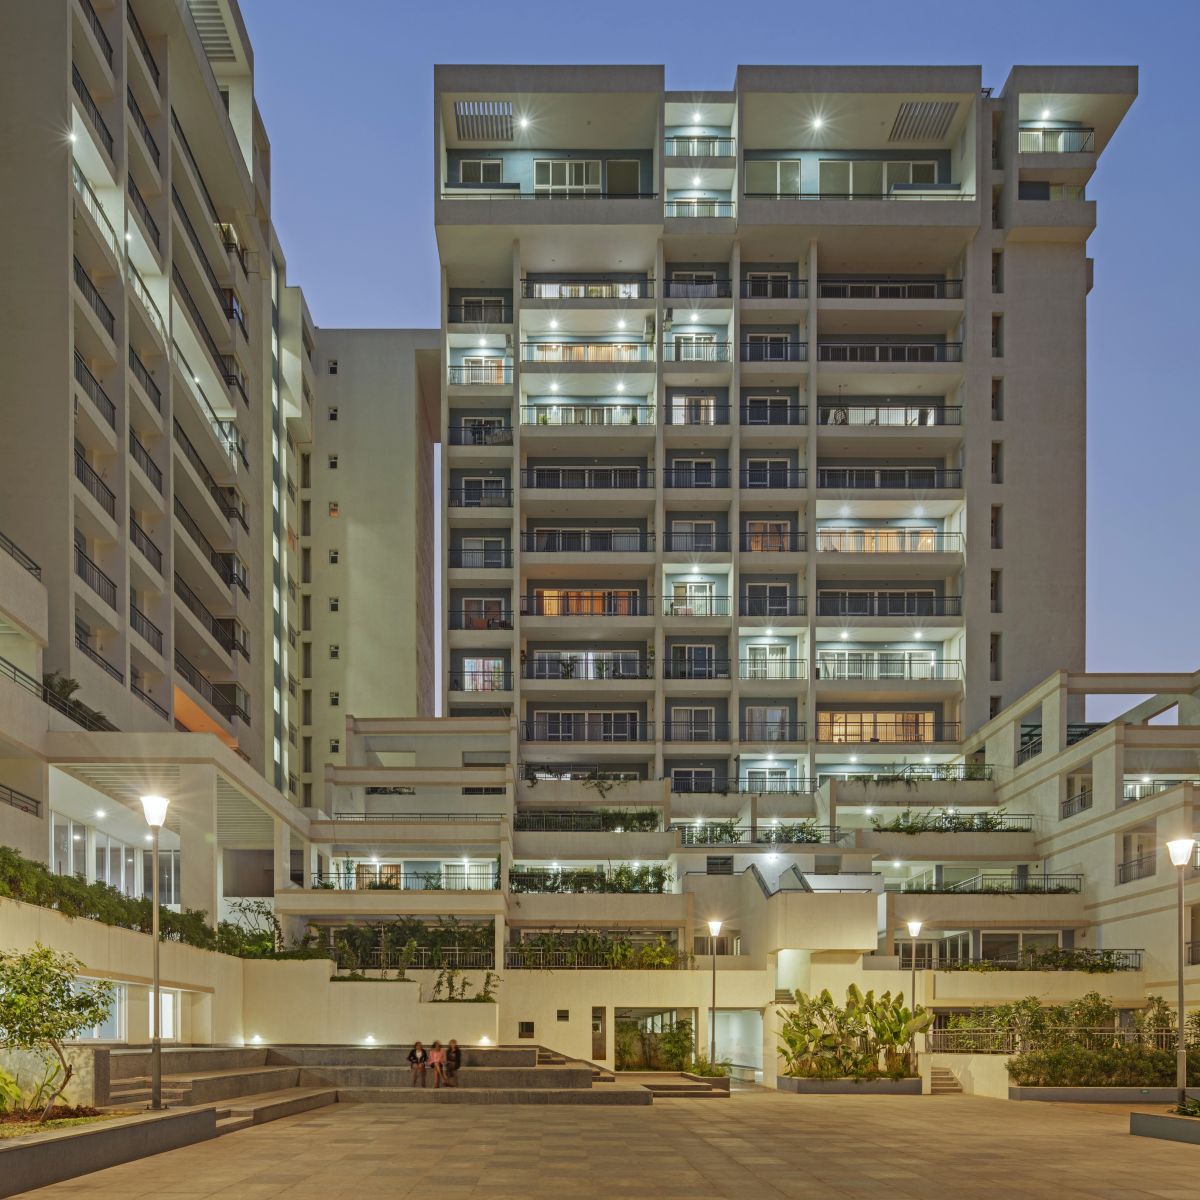 Terraced Residential Highrise, at Nallurhalli Road, Siddhapura, Bangalore, by CnT Architects 23